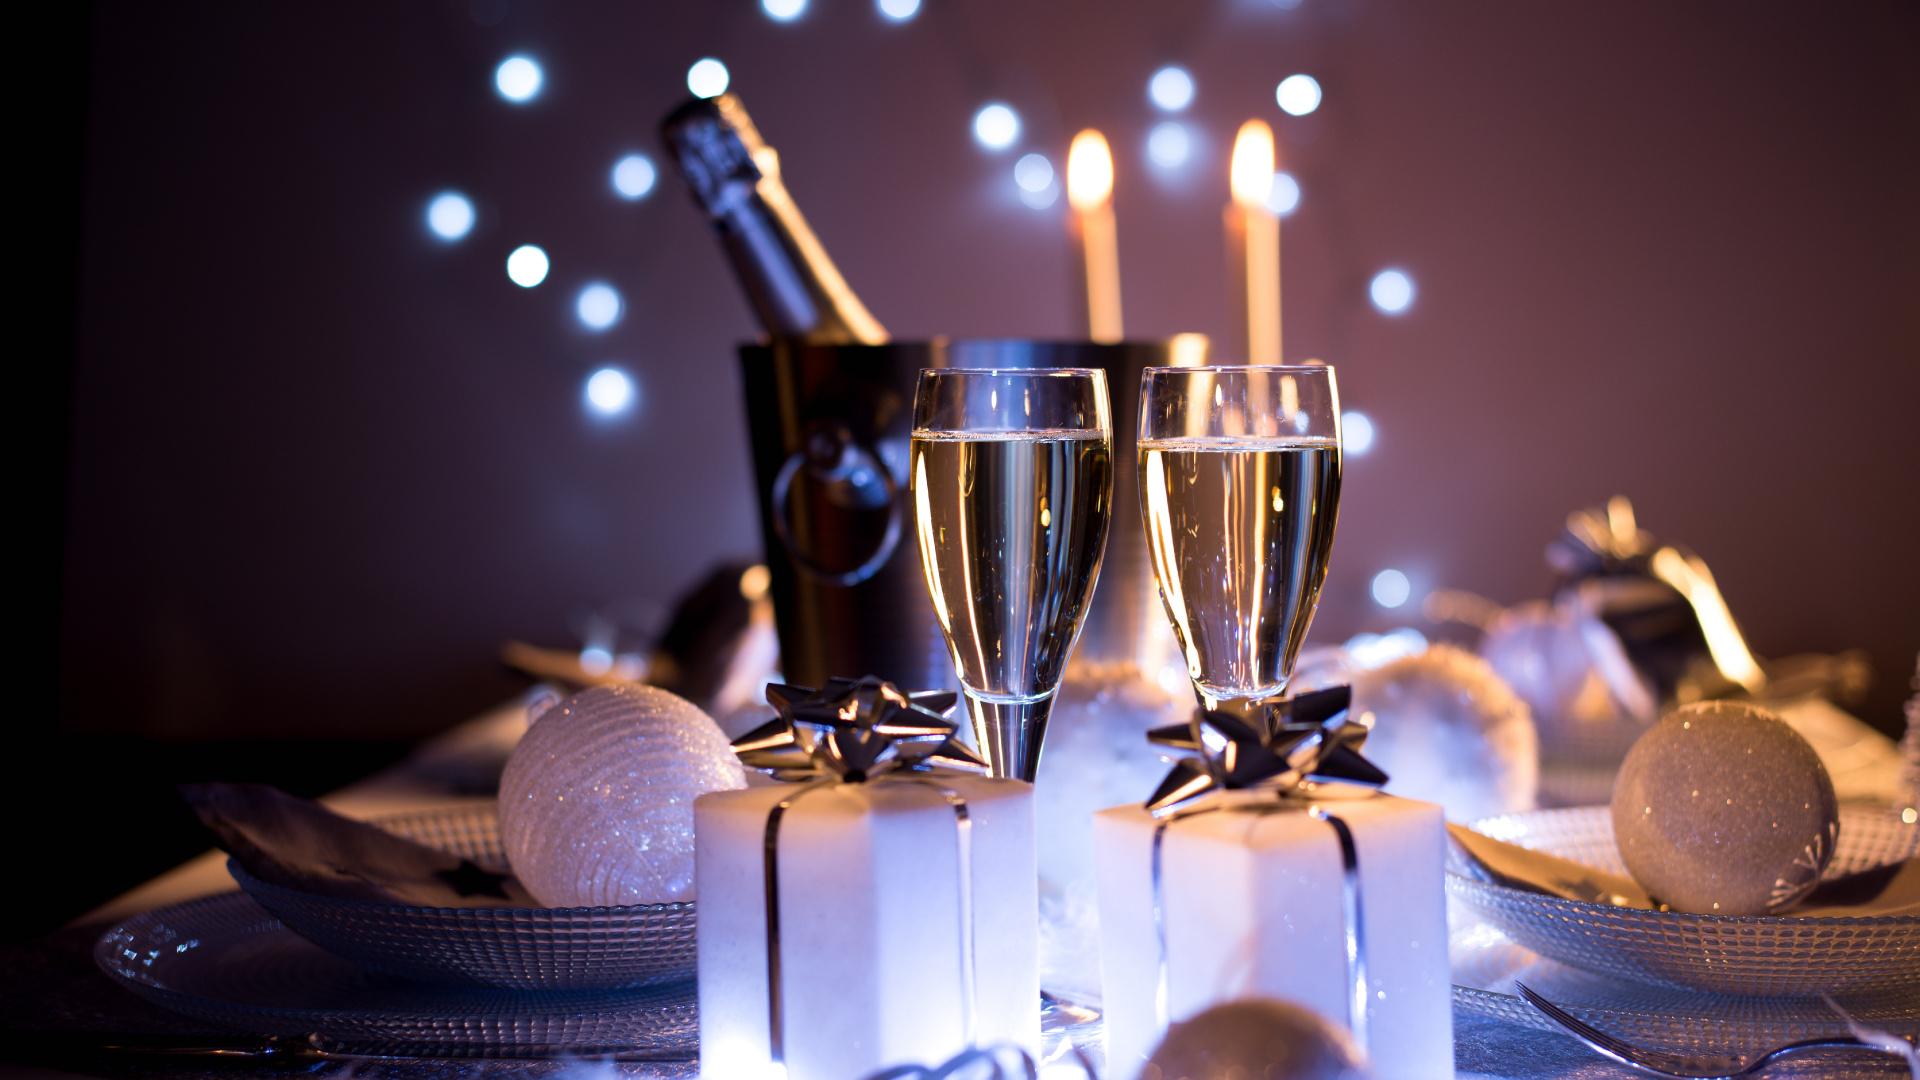 Champagne, Wine, New Years Eve, New Year, Still Life. Wallpaper in 1920x1080 Resolution